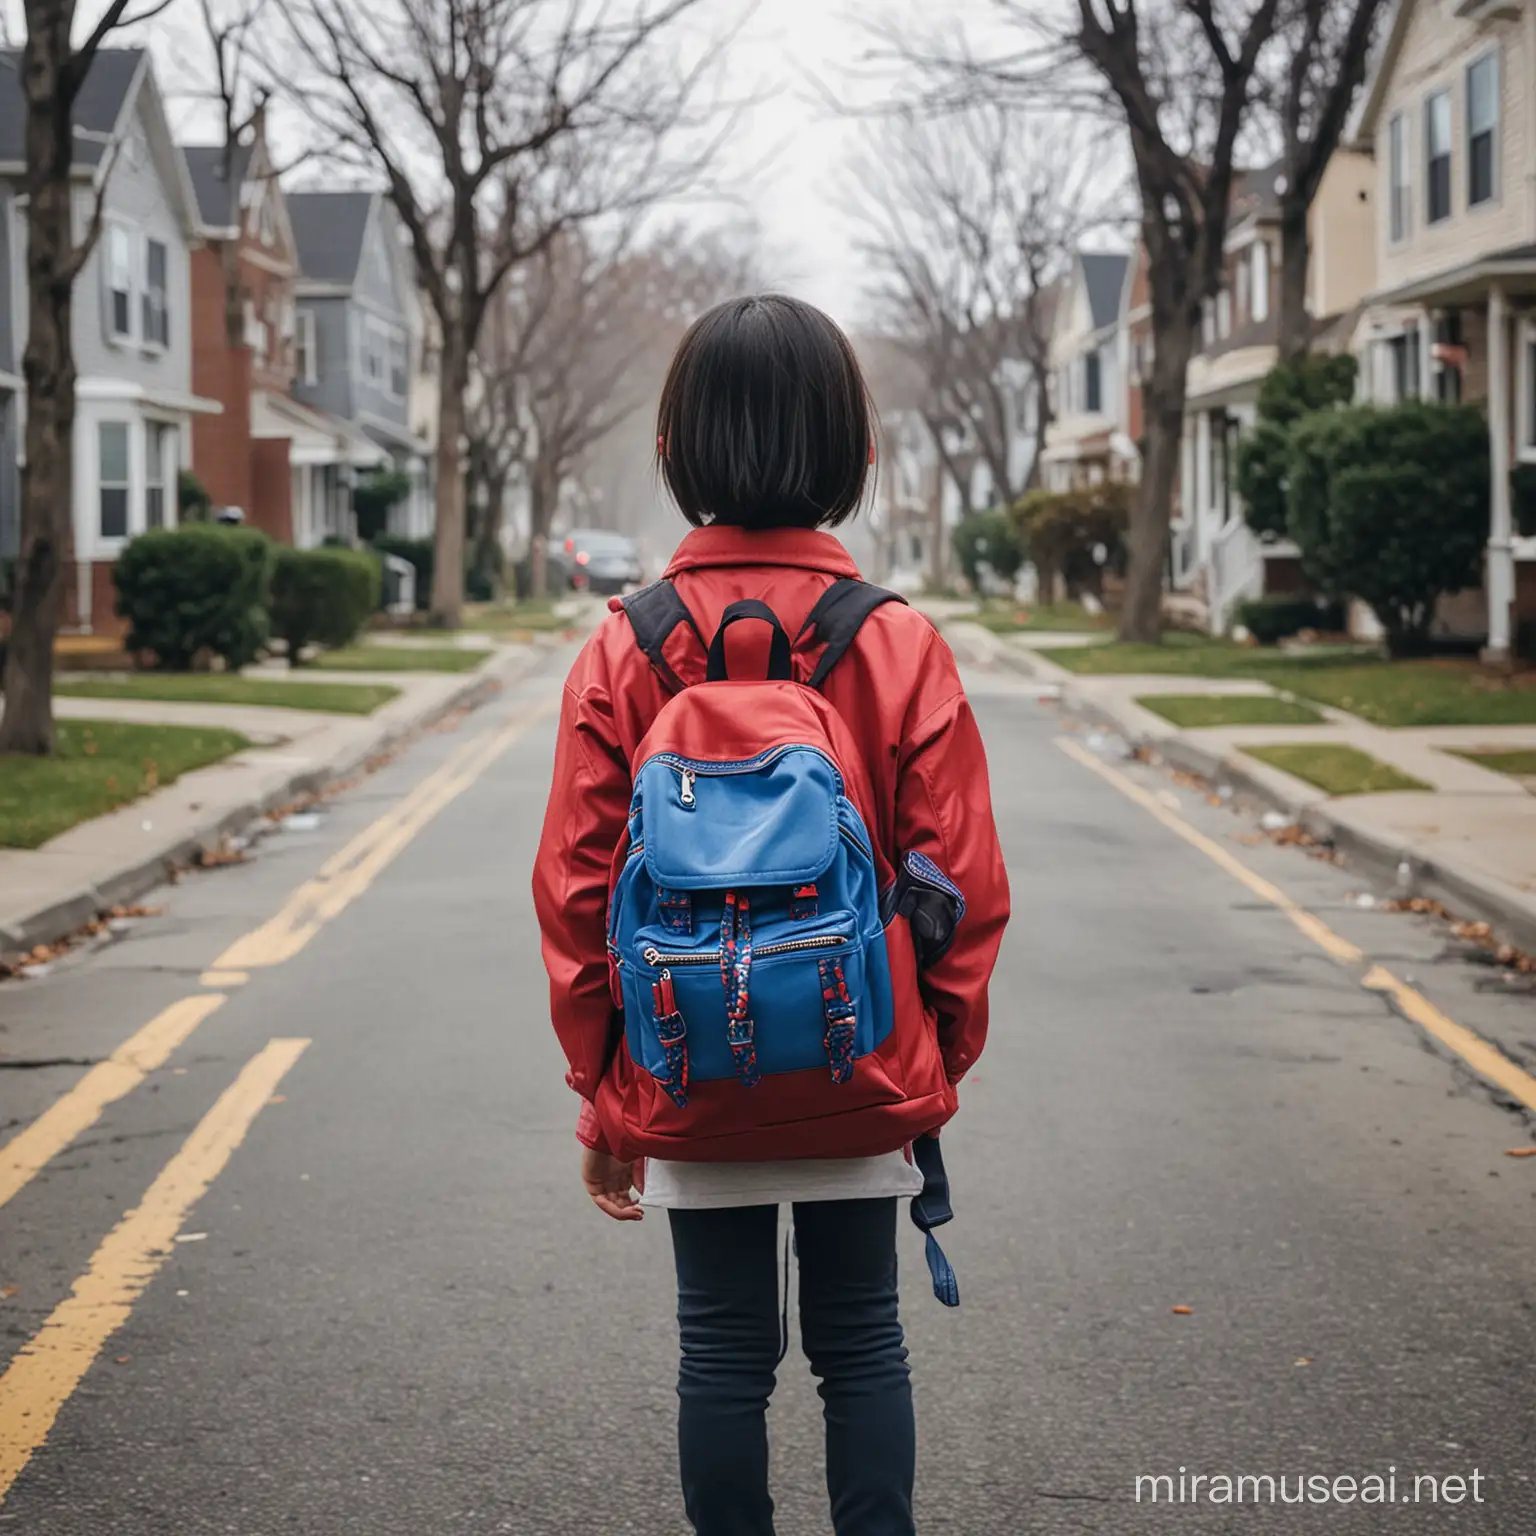 Asian Girl with Red and Blue Backpack in Empty American Neighborhood under Gloomy Sky